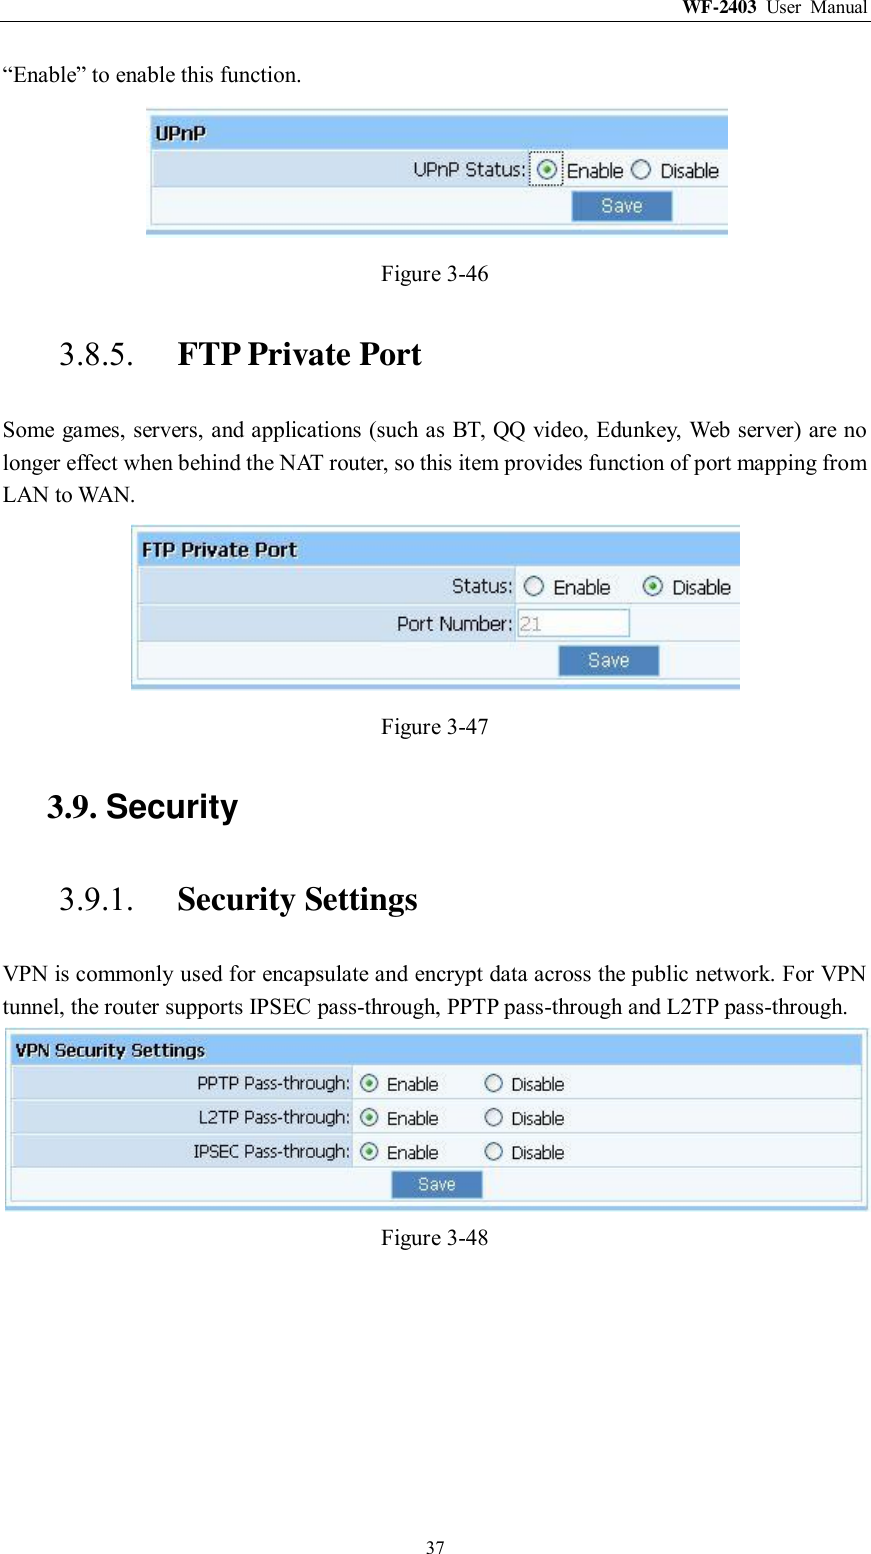 WF-2403  User  Manual  37 “Enable” to enable this function.  Figure 3-46 3.8.5. FTP Private Port Some games, servers, and applications (such as BT, QQ video, Edunkey, Web server) are no longer effect when behind the NAT router, so this item provides function of port mapping from LAN to WAN.  Figure 3-47 3.9. Security 3.9.1. Security Settings VPN is commonly used for encapsulate and encrypt data across the public network. For VPN tunnel, the router supports IPSEC pass-through, PPTP pass-through and L2TP pass-through.  Figure 3-48 